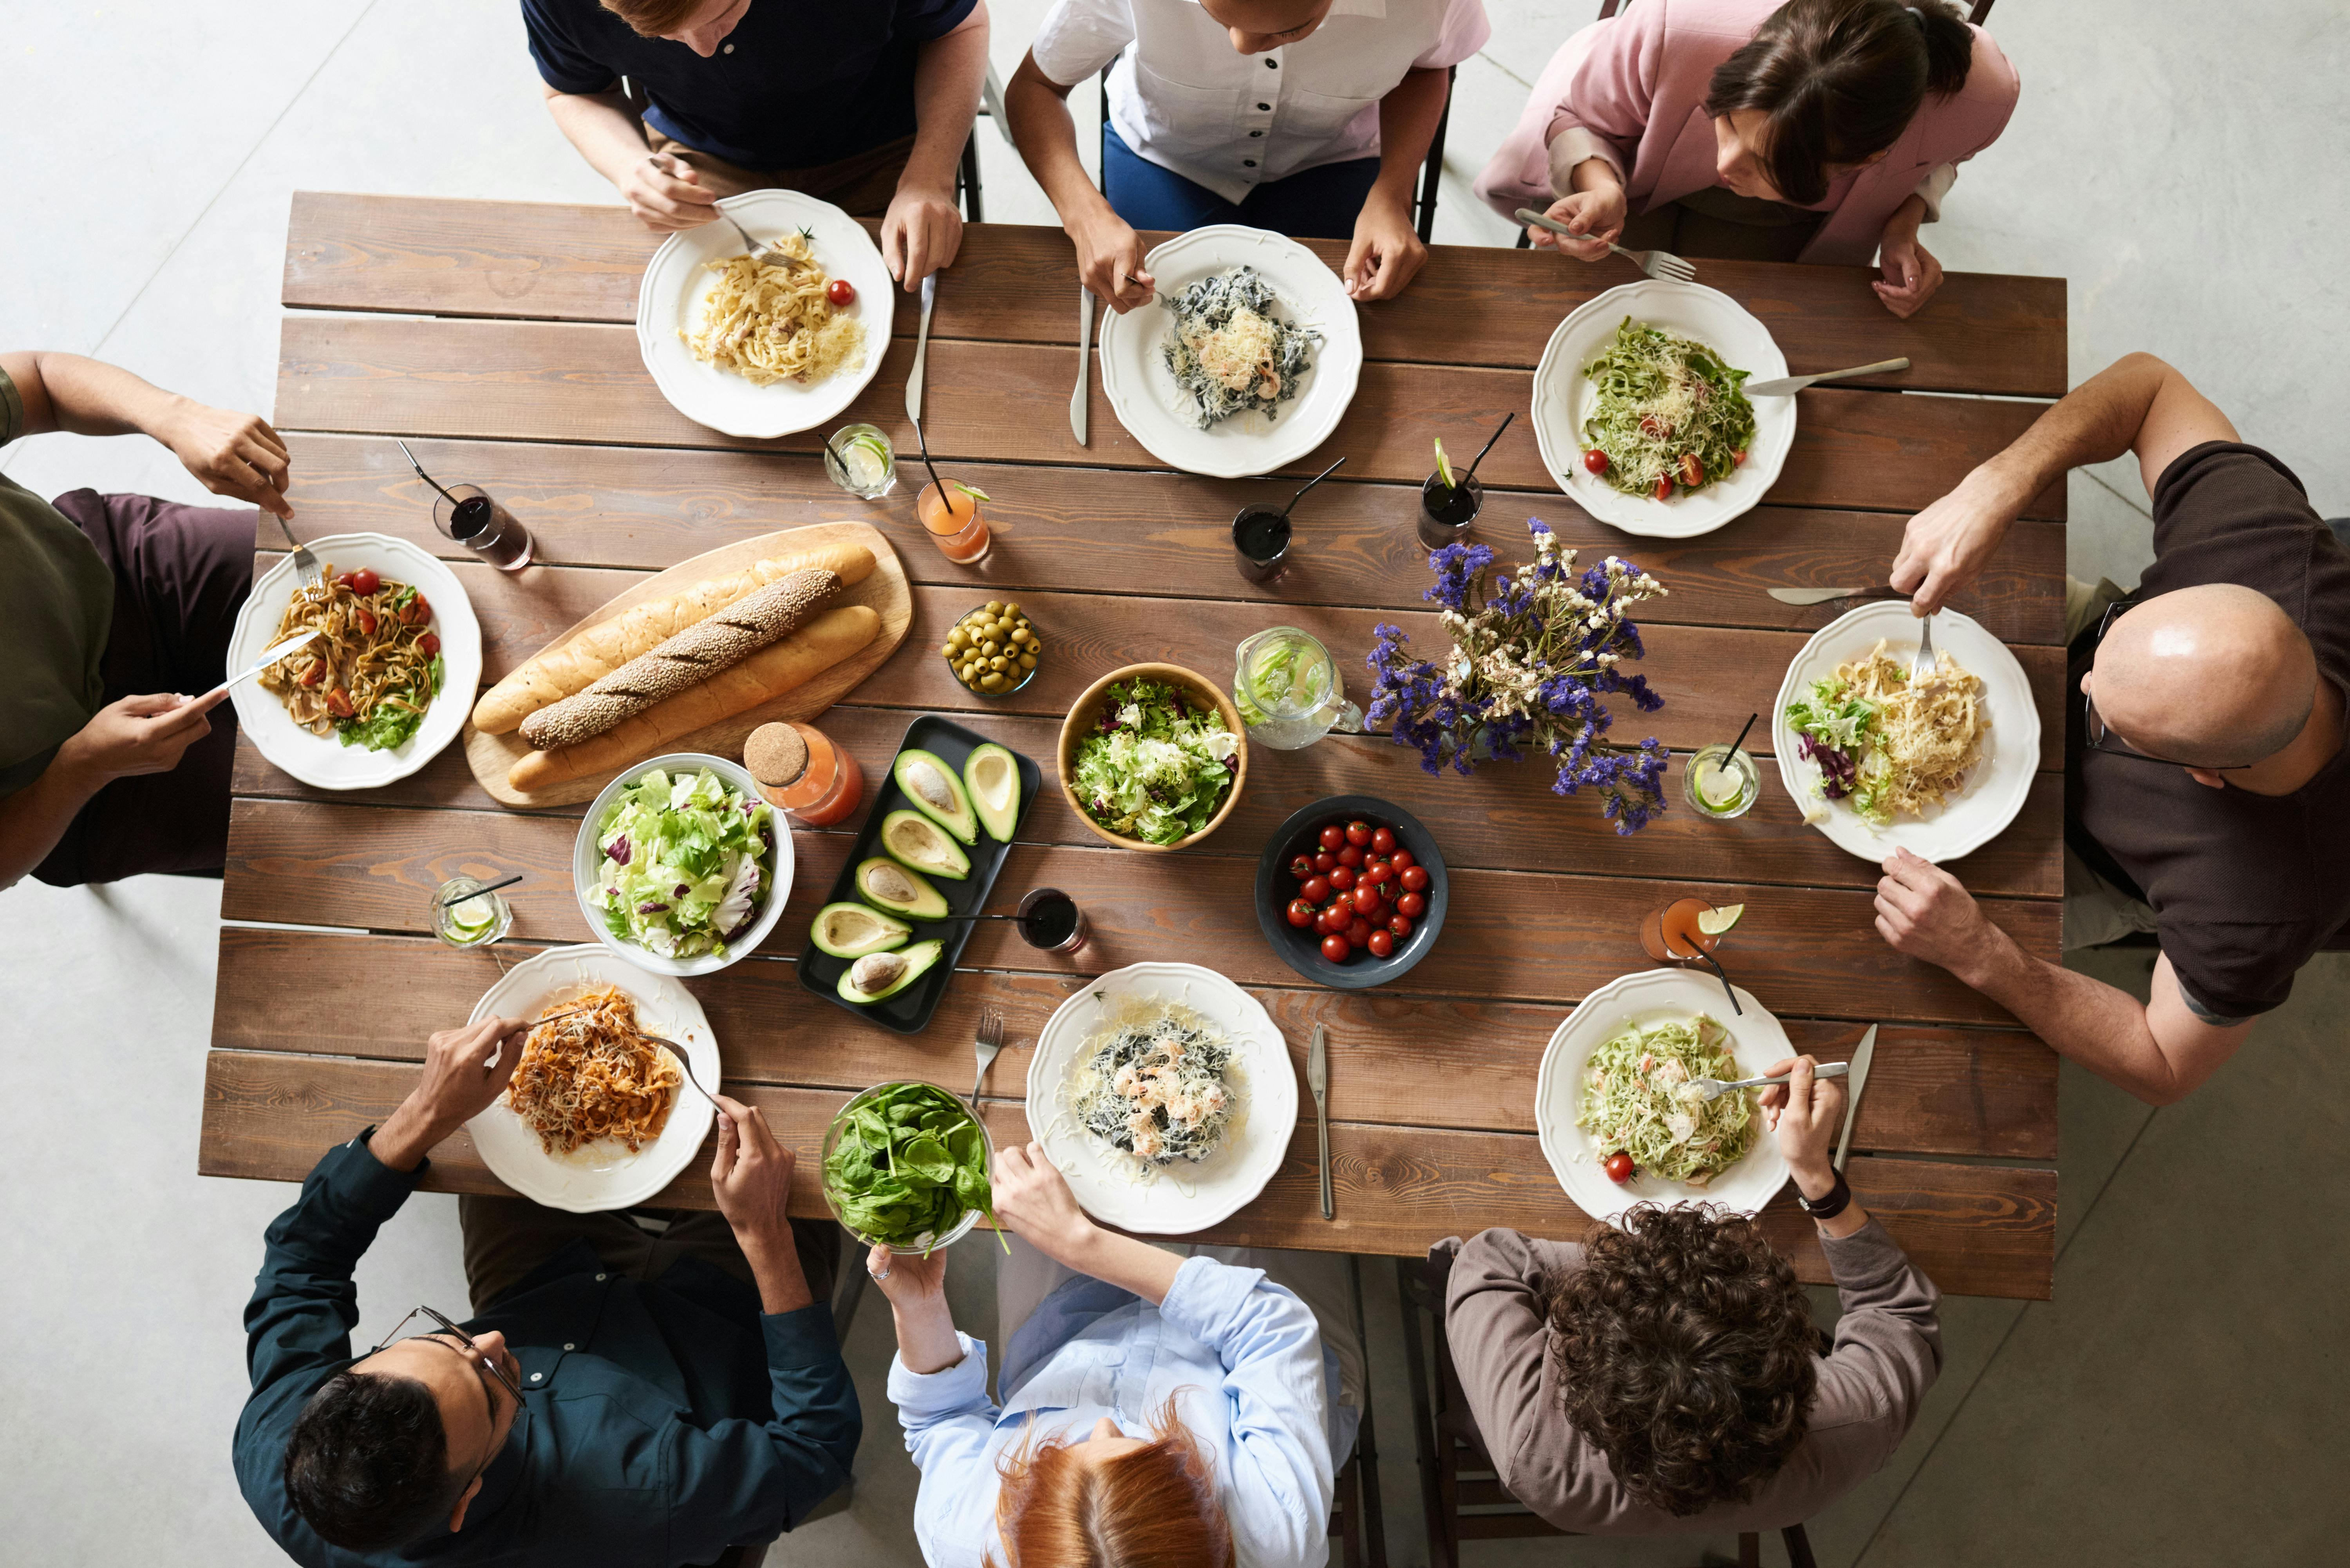 A family sharing a meal together | Source: Pexels